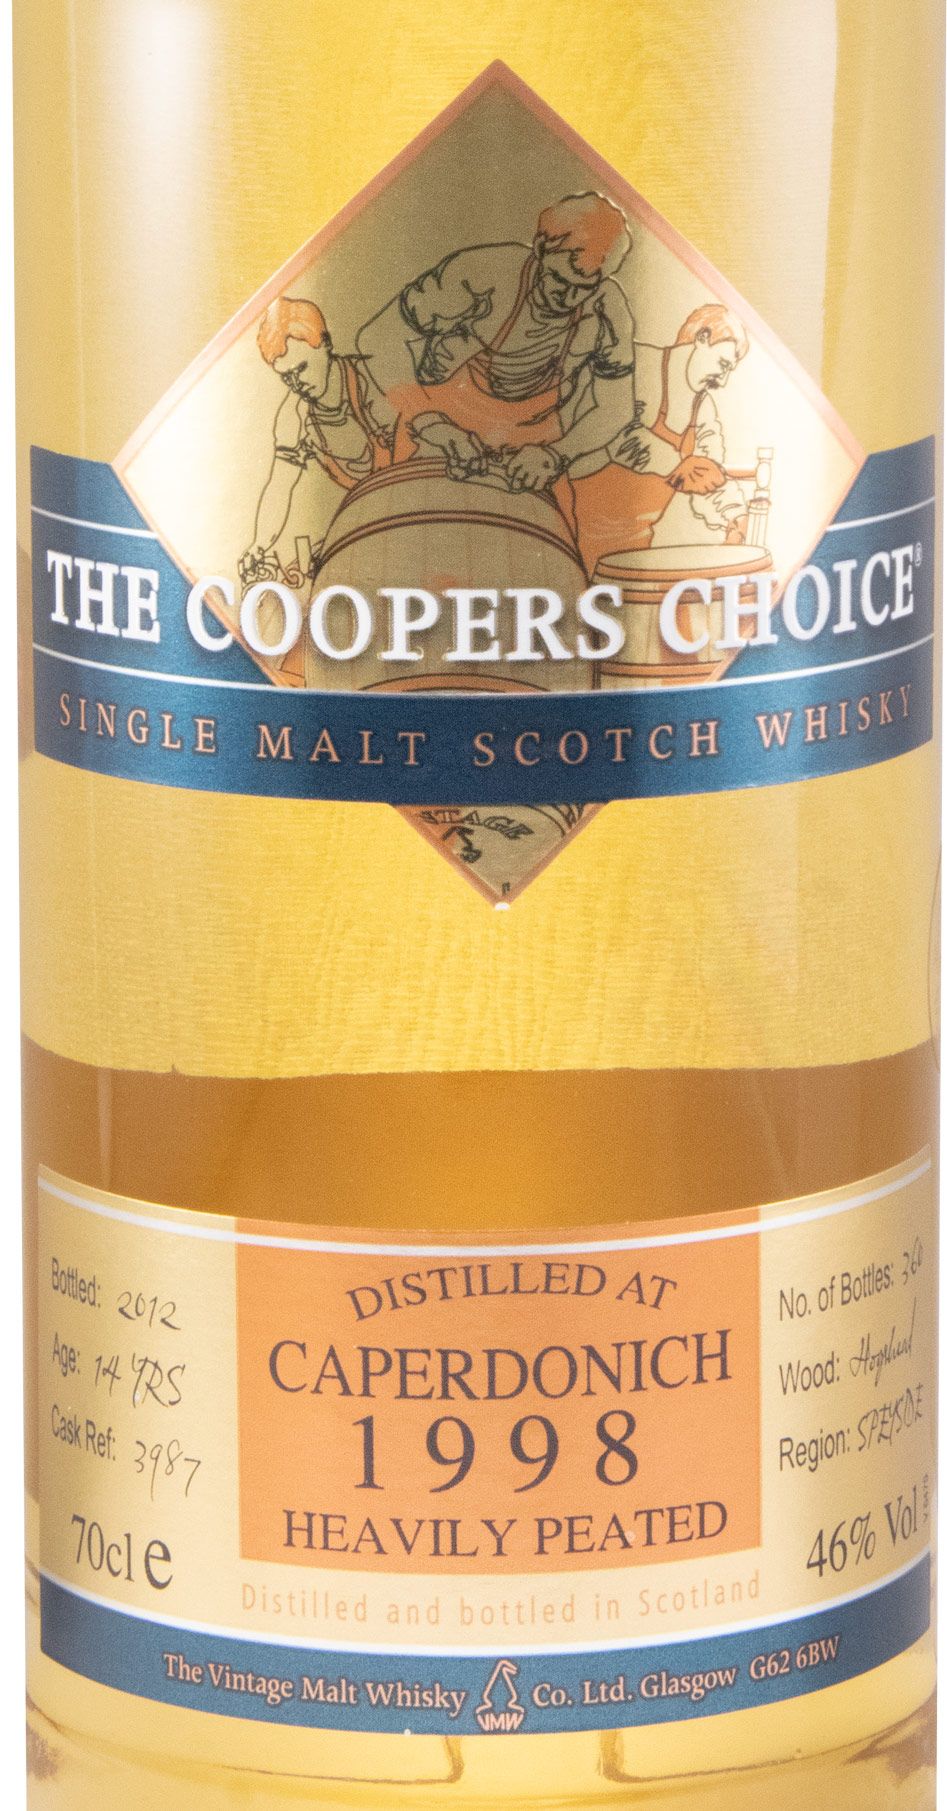 1998 The Coopers Choice Caperdonich Heavily Peated